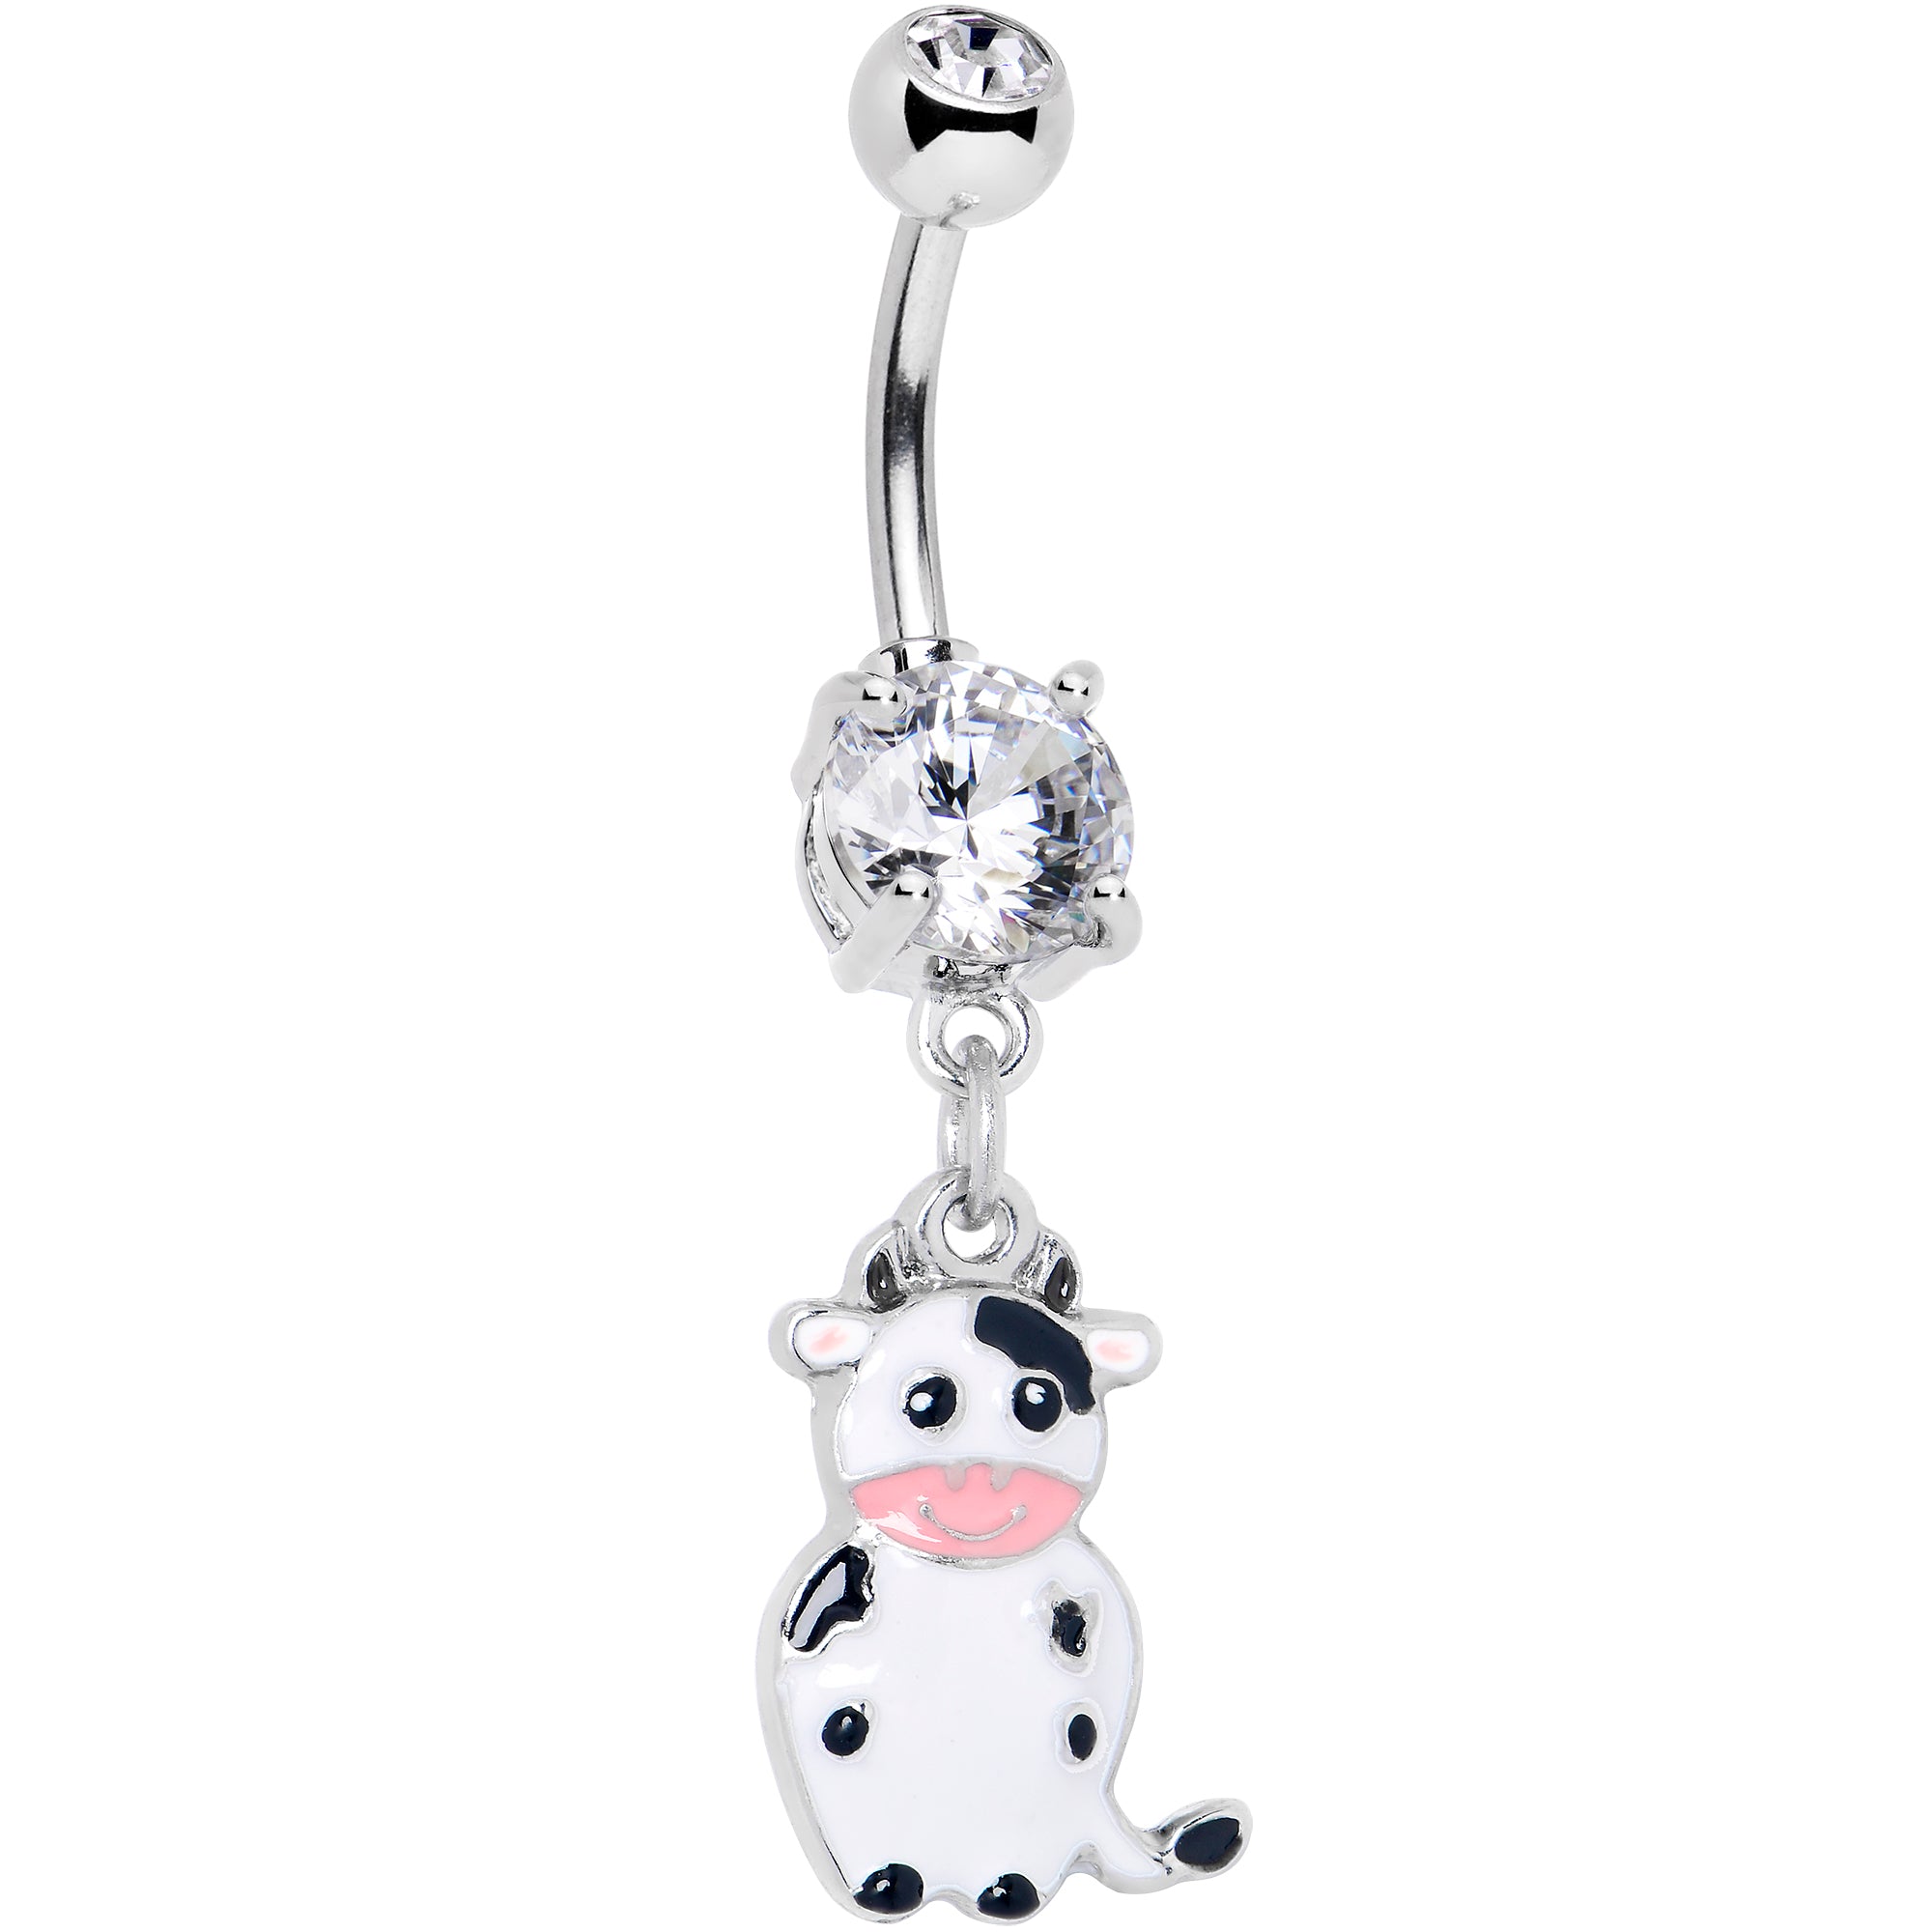 Clear Gem Moo Cow Cutie Dangle Belly Ring